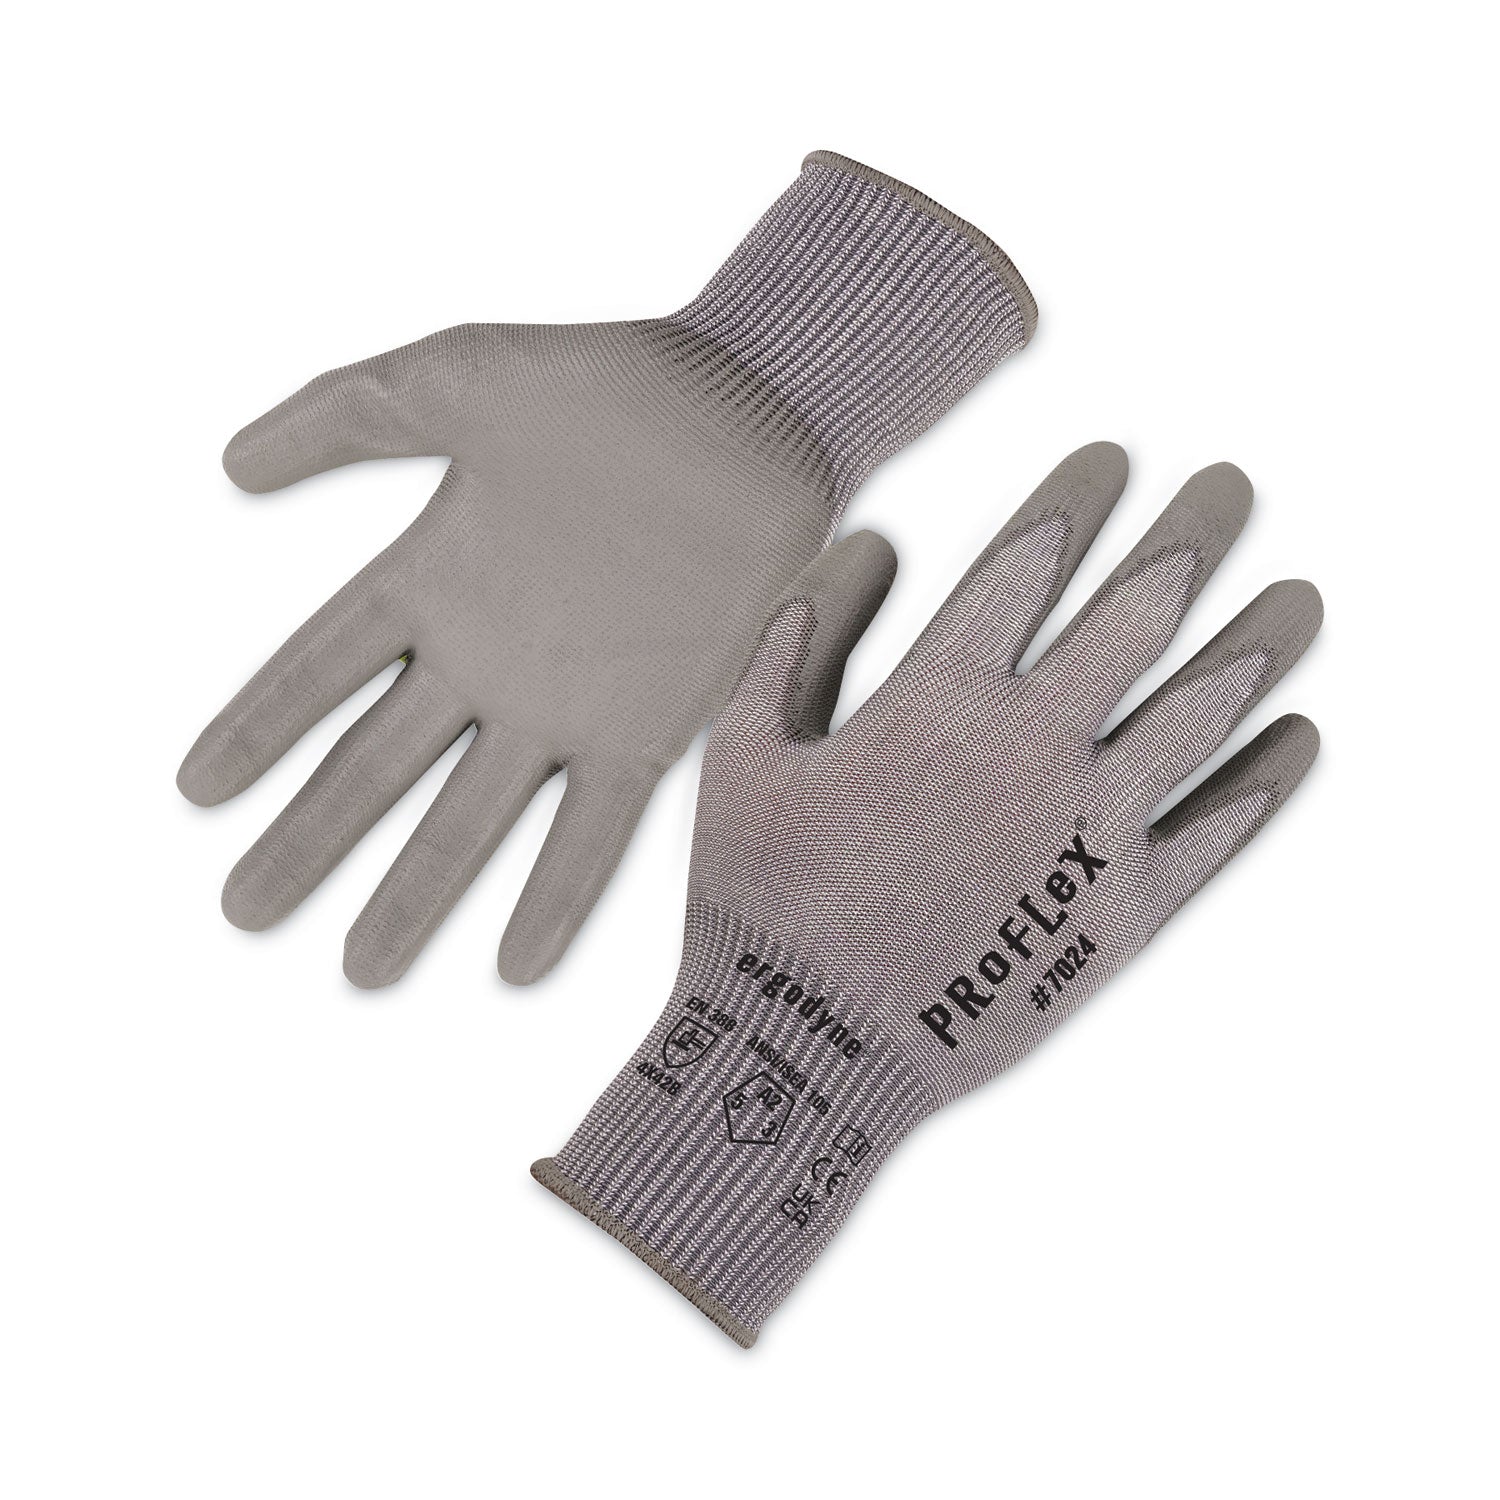 proflex-7024-ansi-a2-pu-coated-cr-gloves-gray-2x-large-12-pairs-pack-ships-in-1-3-business-days_ego10396 - 1